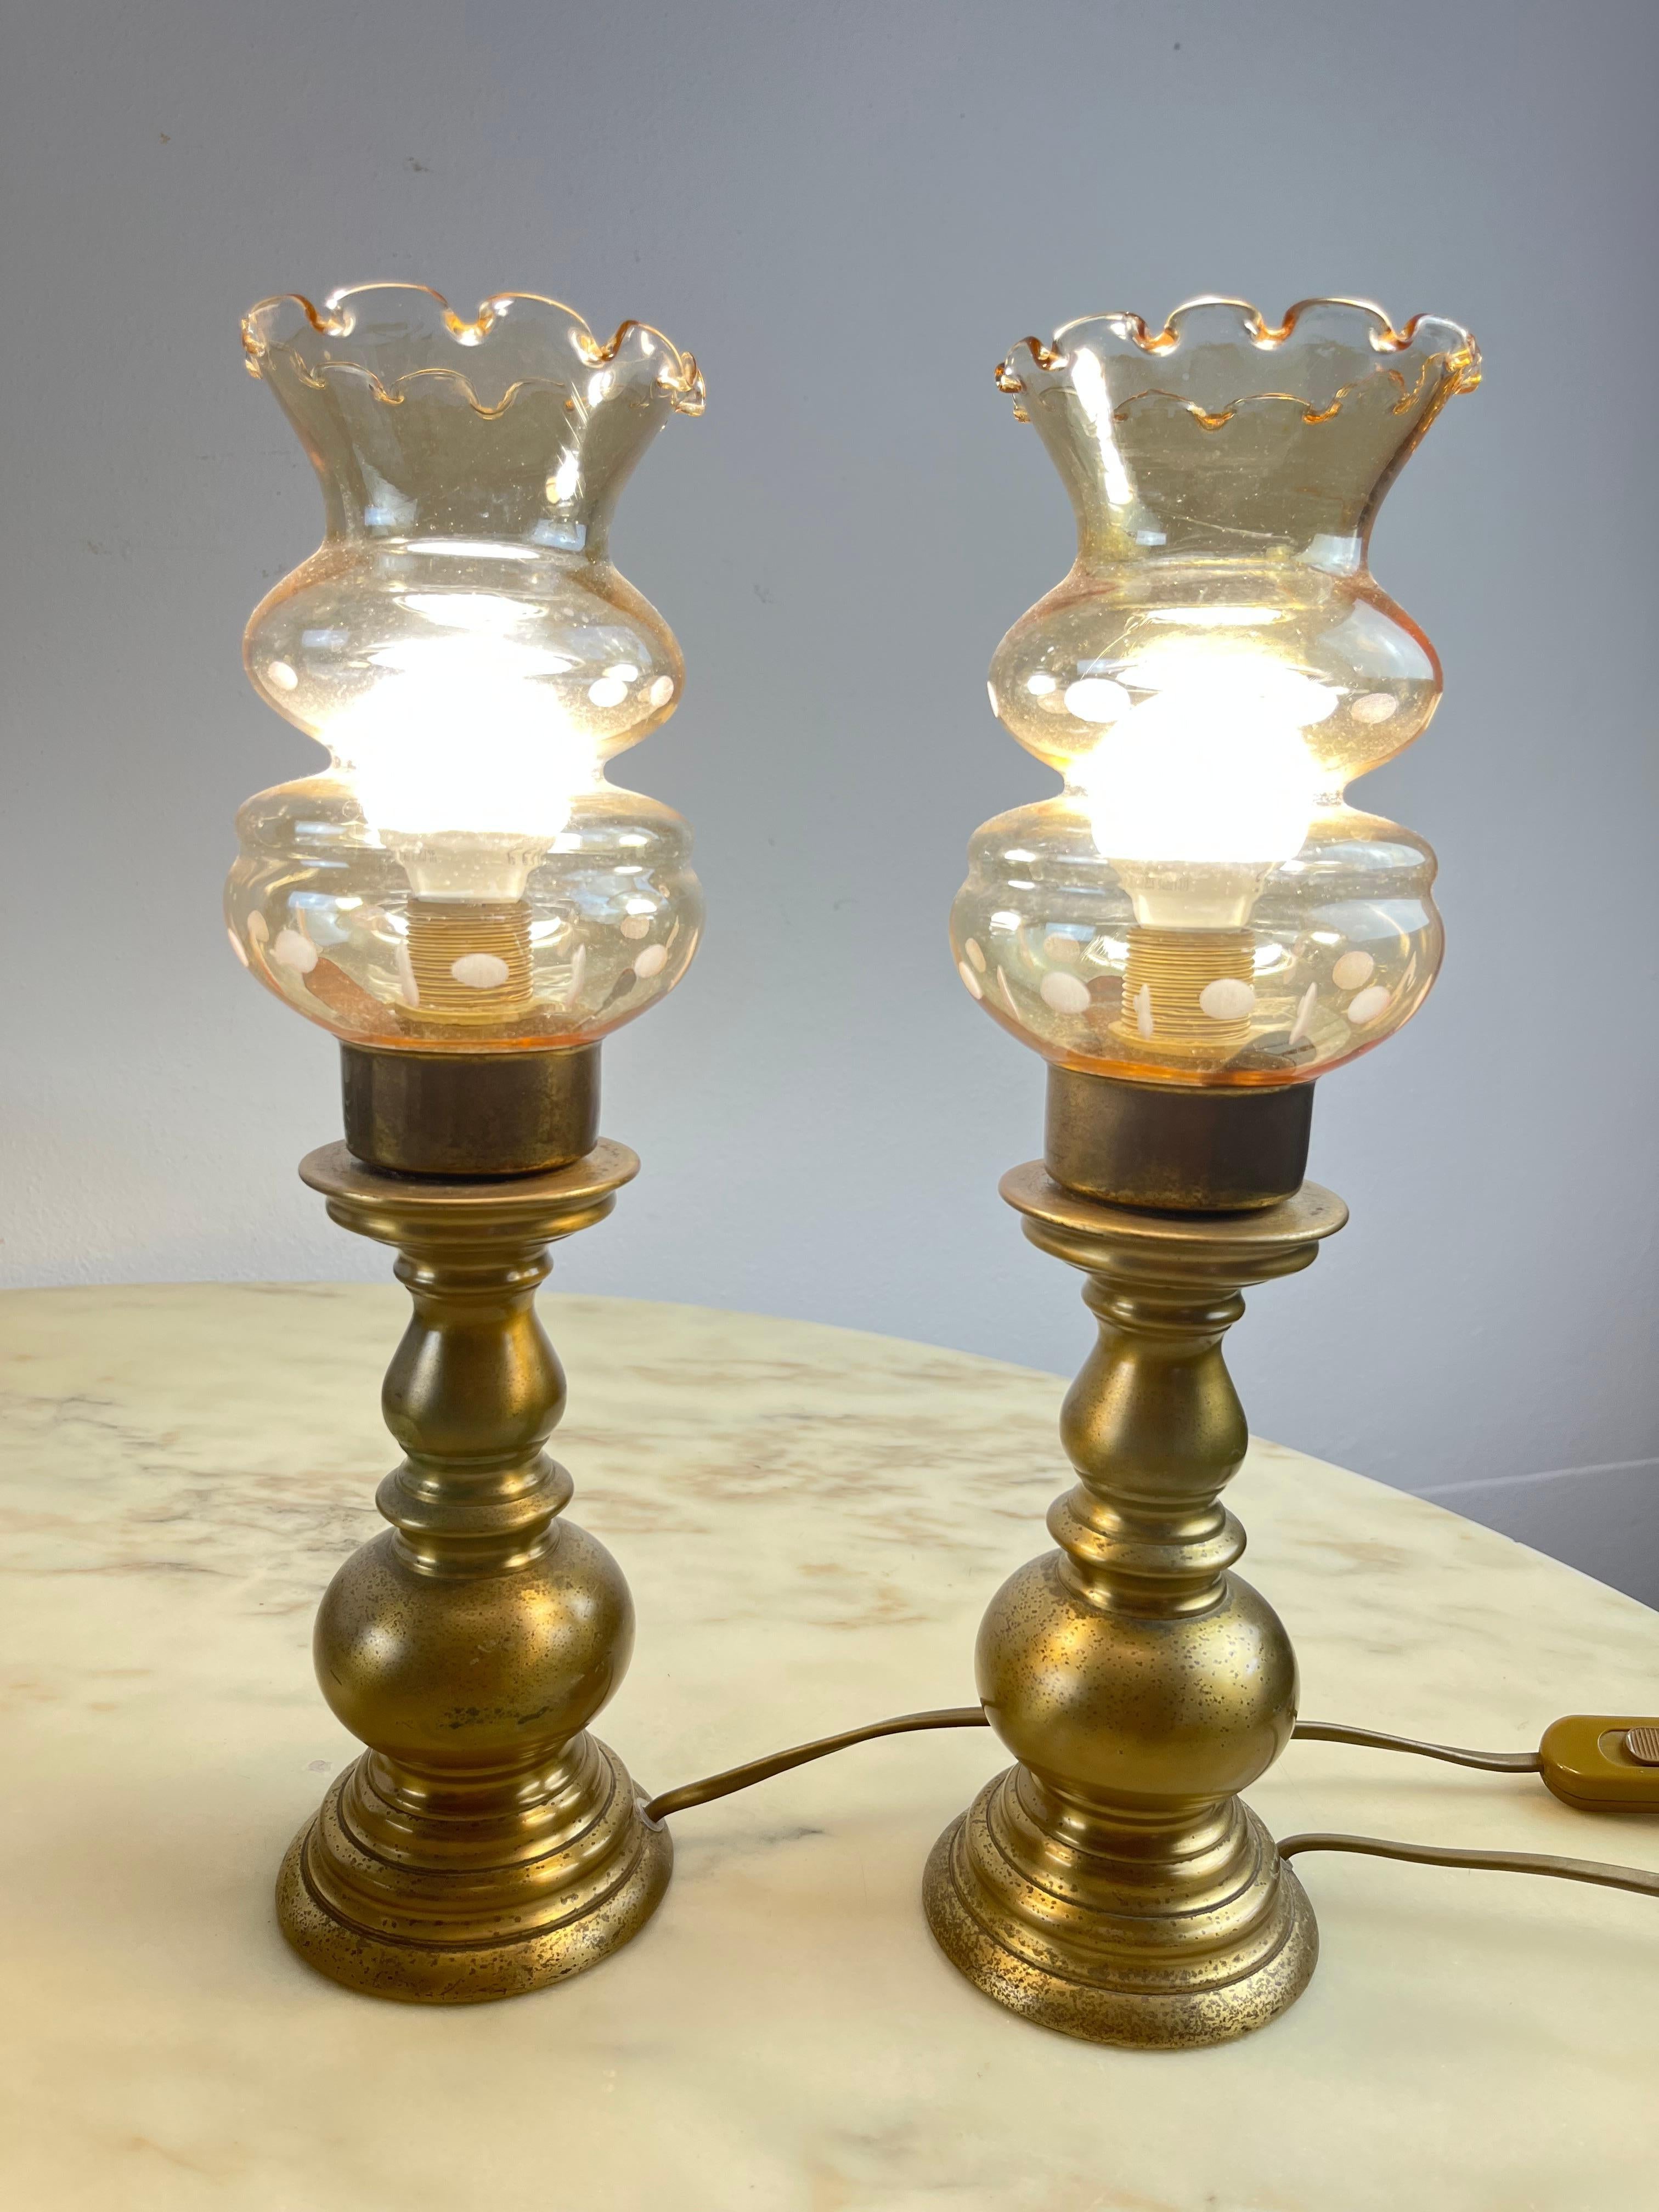 Pair of bedside table lamps, brass and glass, Italy, 80s
Small signs of wear on the metal parts, they are functional.